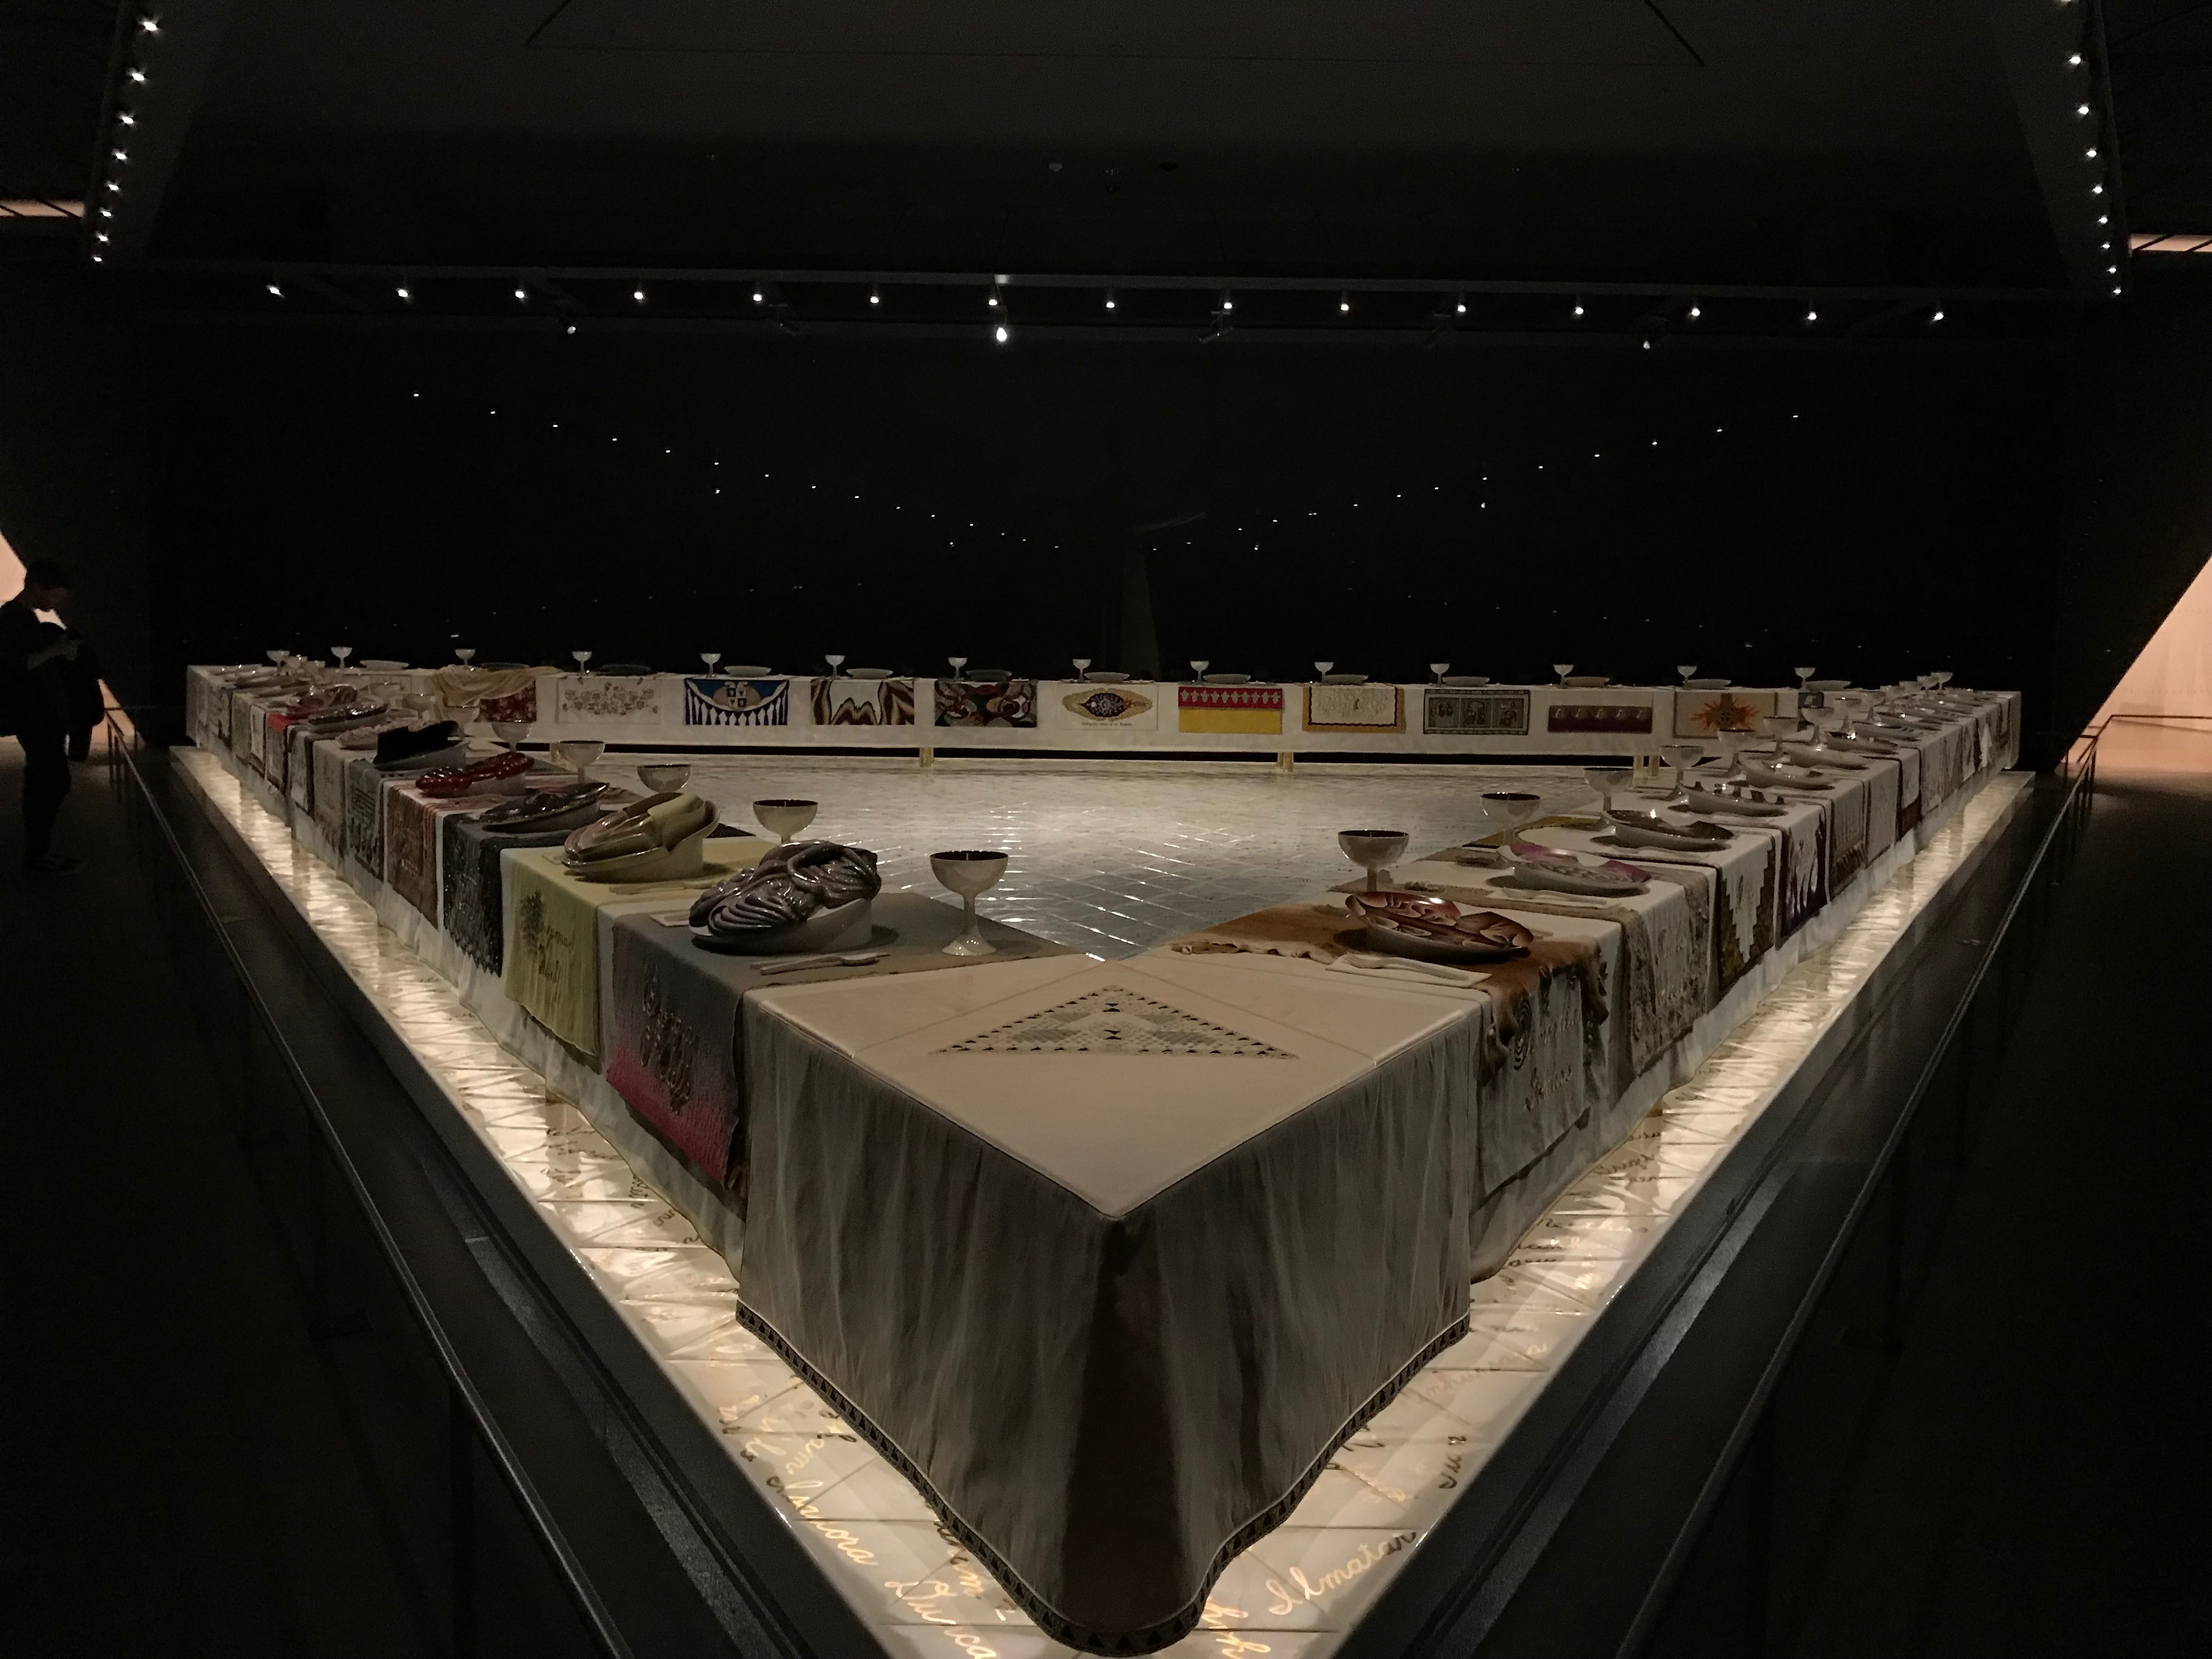 The Dinner Party, an exhibition celebrating feminist icons at the Elizabeth A. Sackler Center in the Brooklyn Museum in New York City. (DCNF/Ethan Barton)